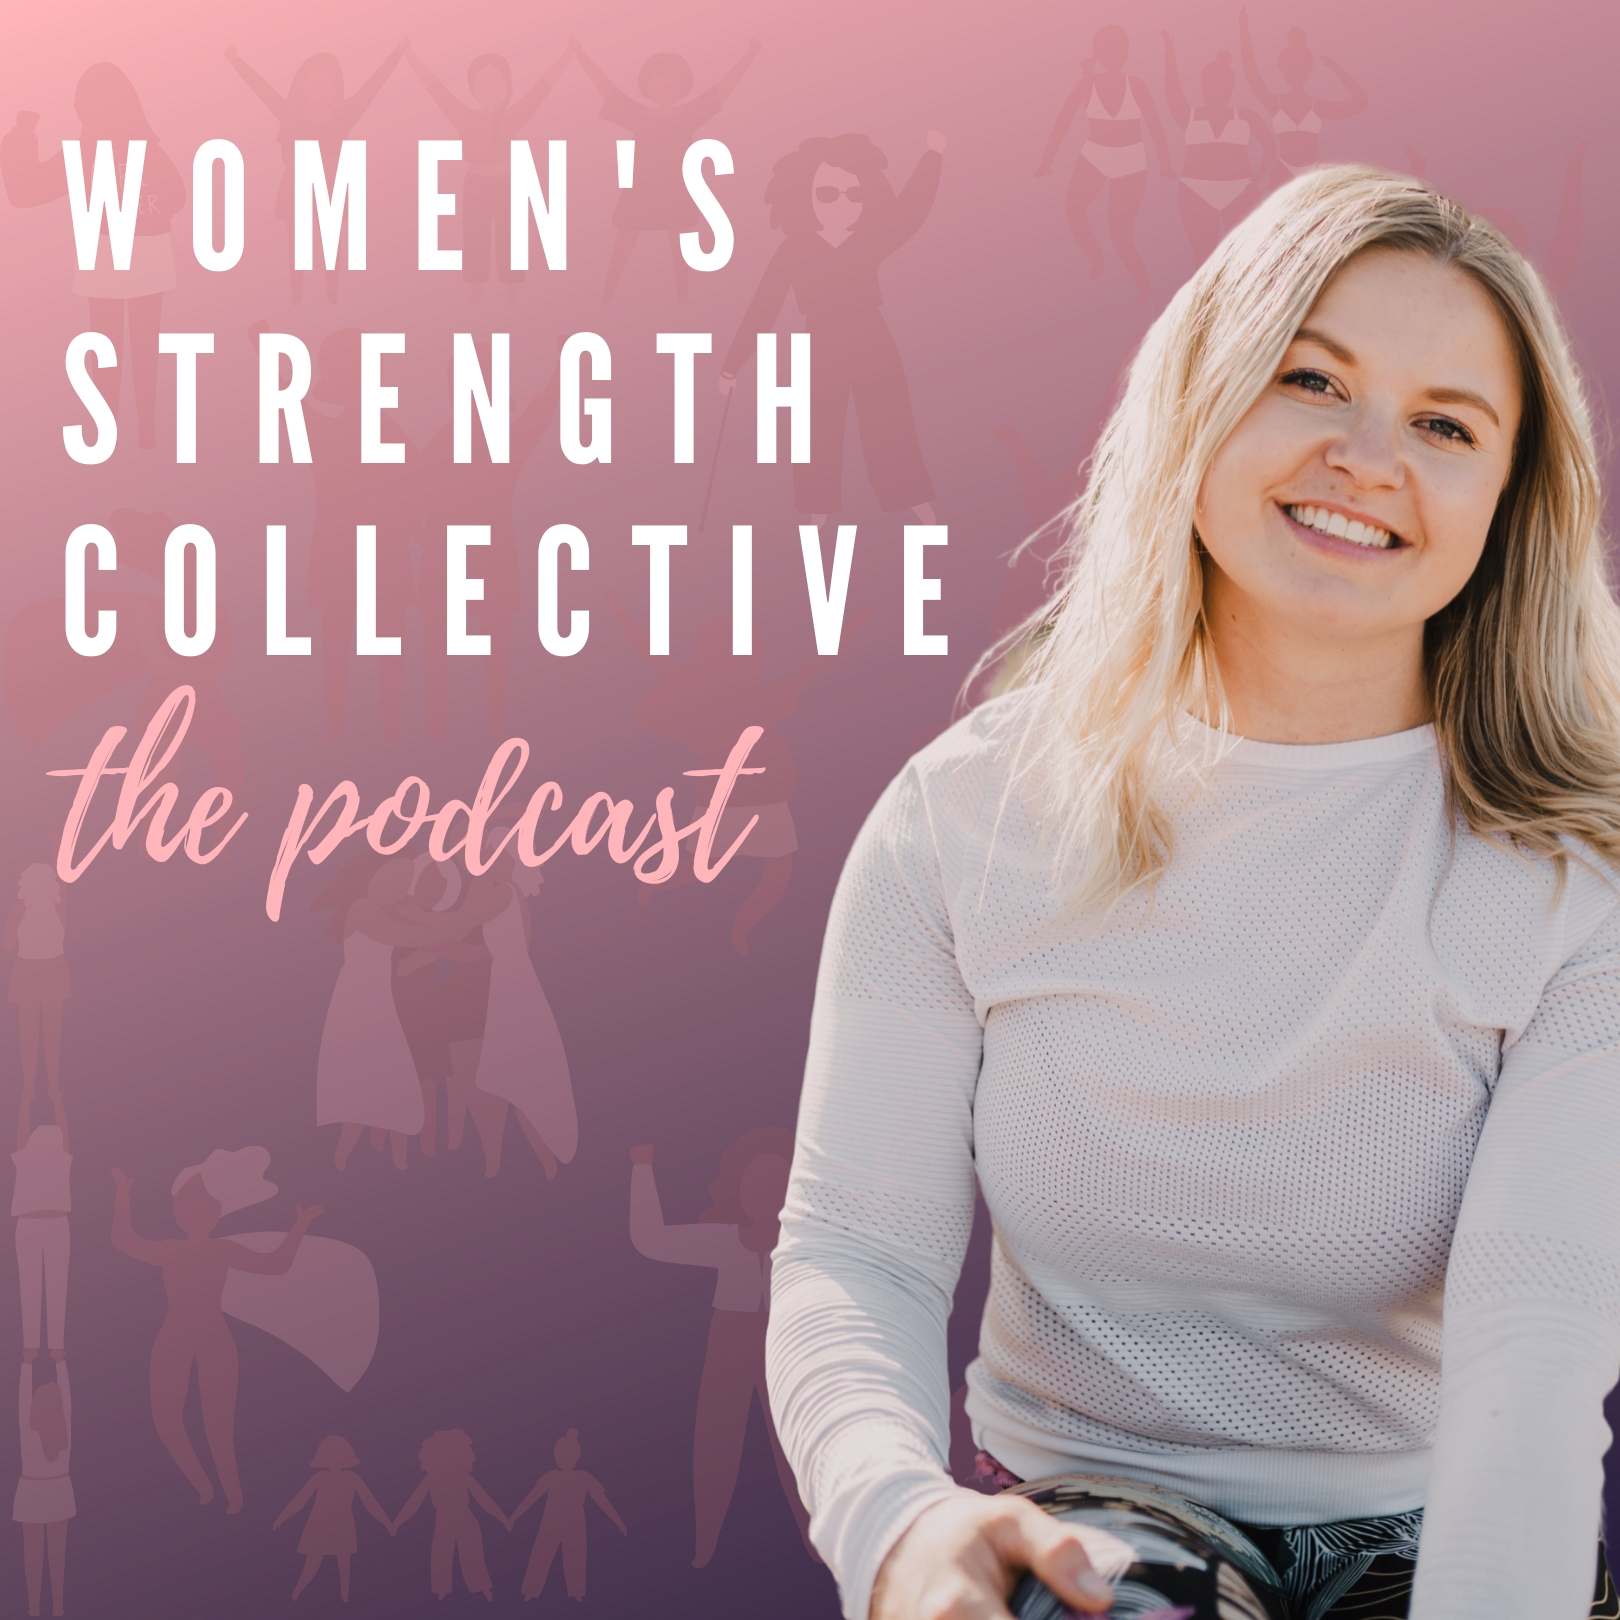 Women's Strength Collective